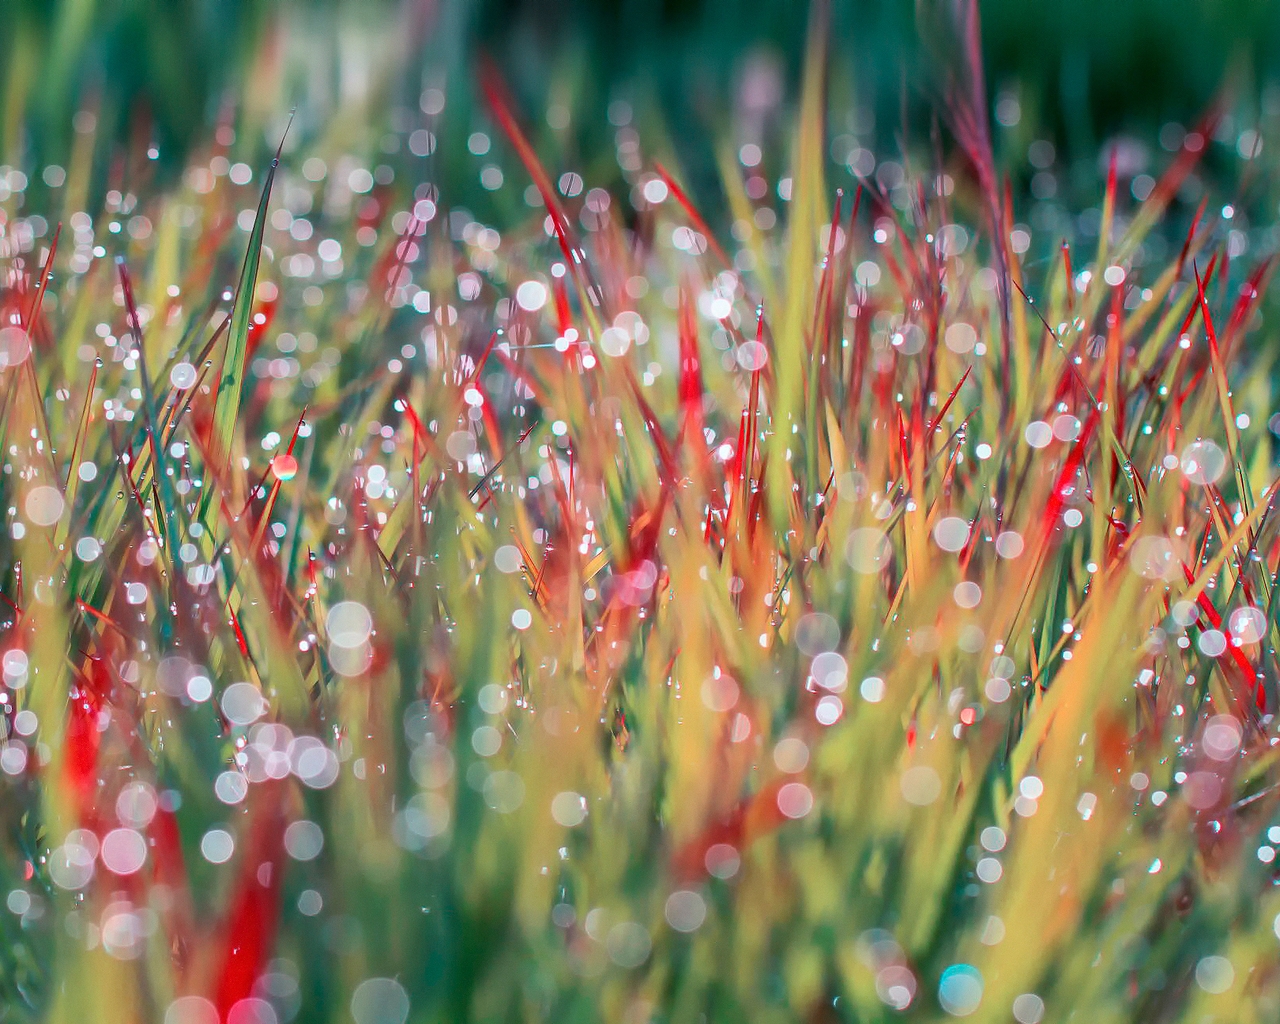 Morning Dew on Grass for 1280 x 1024 resolution